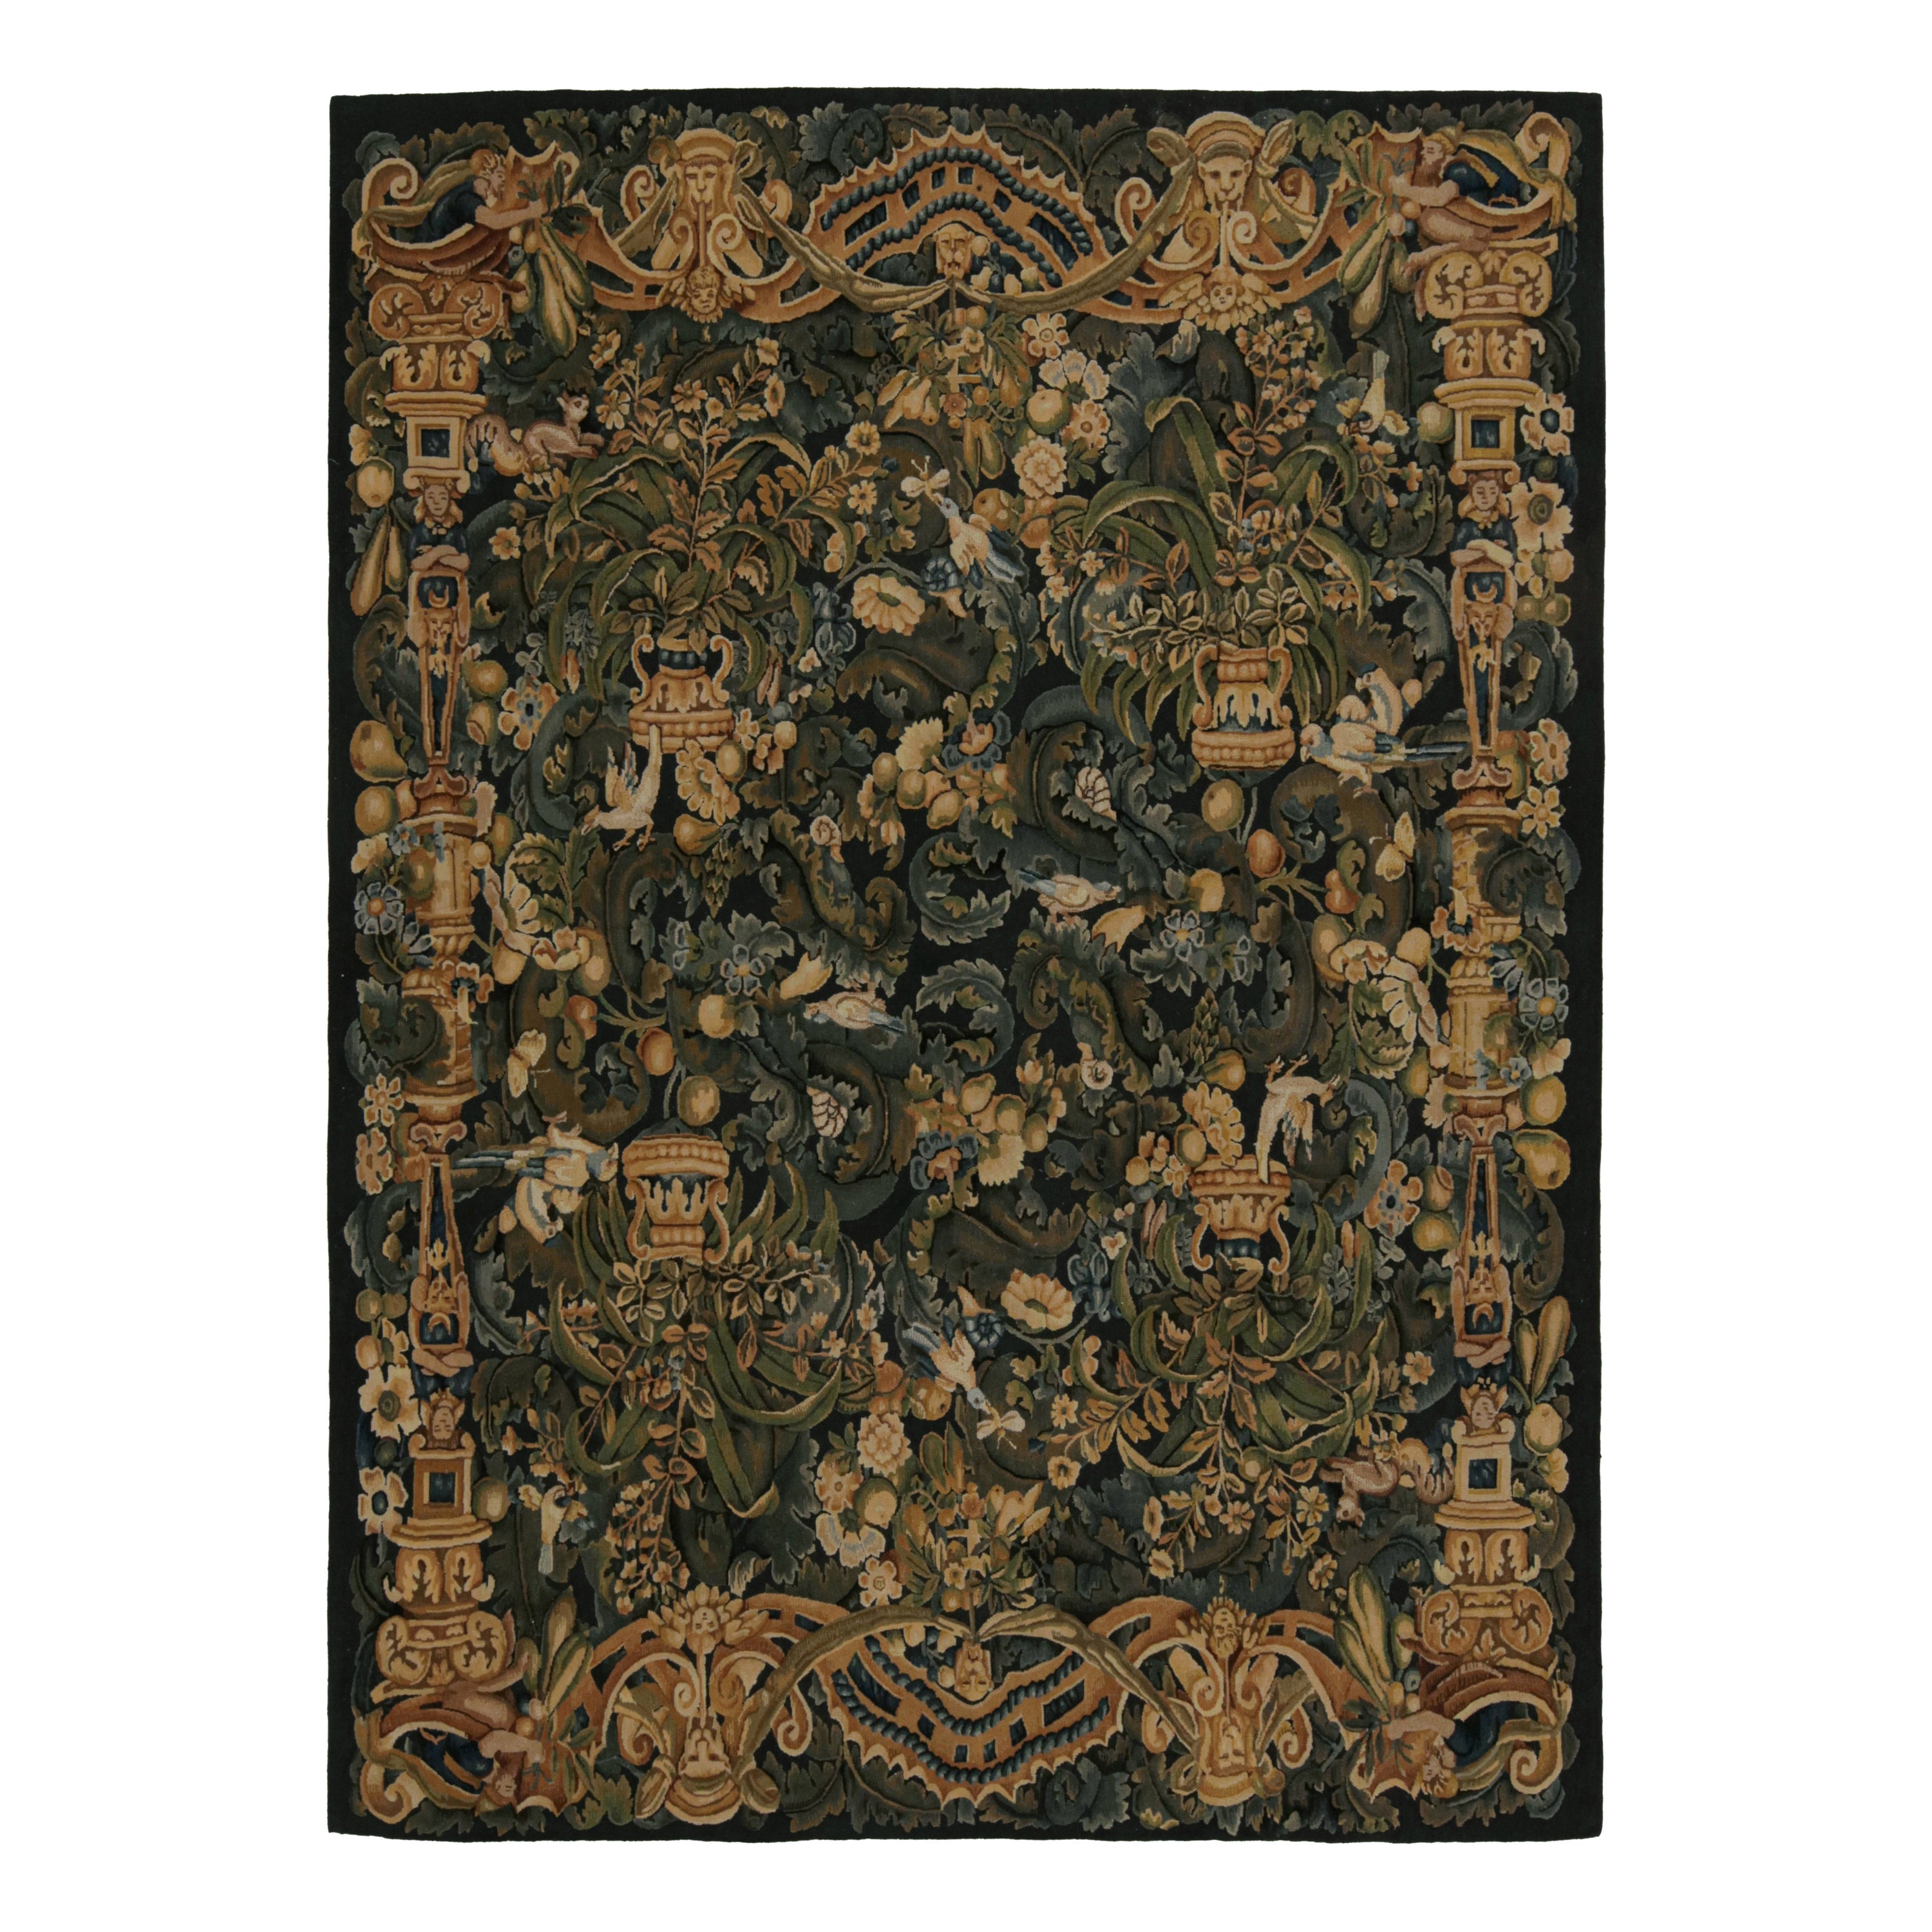 Rug & Kilim’s European Tudor Flatweave Rug with Floral Patterns and Pictorials For Sale